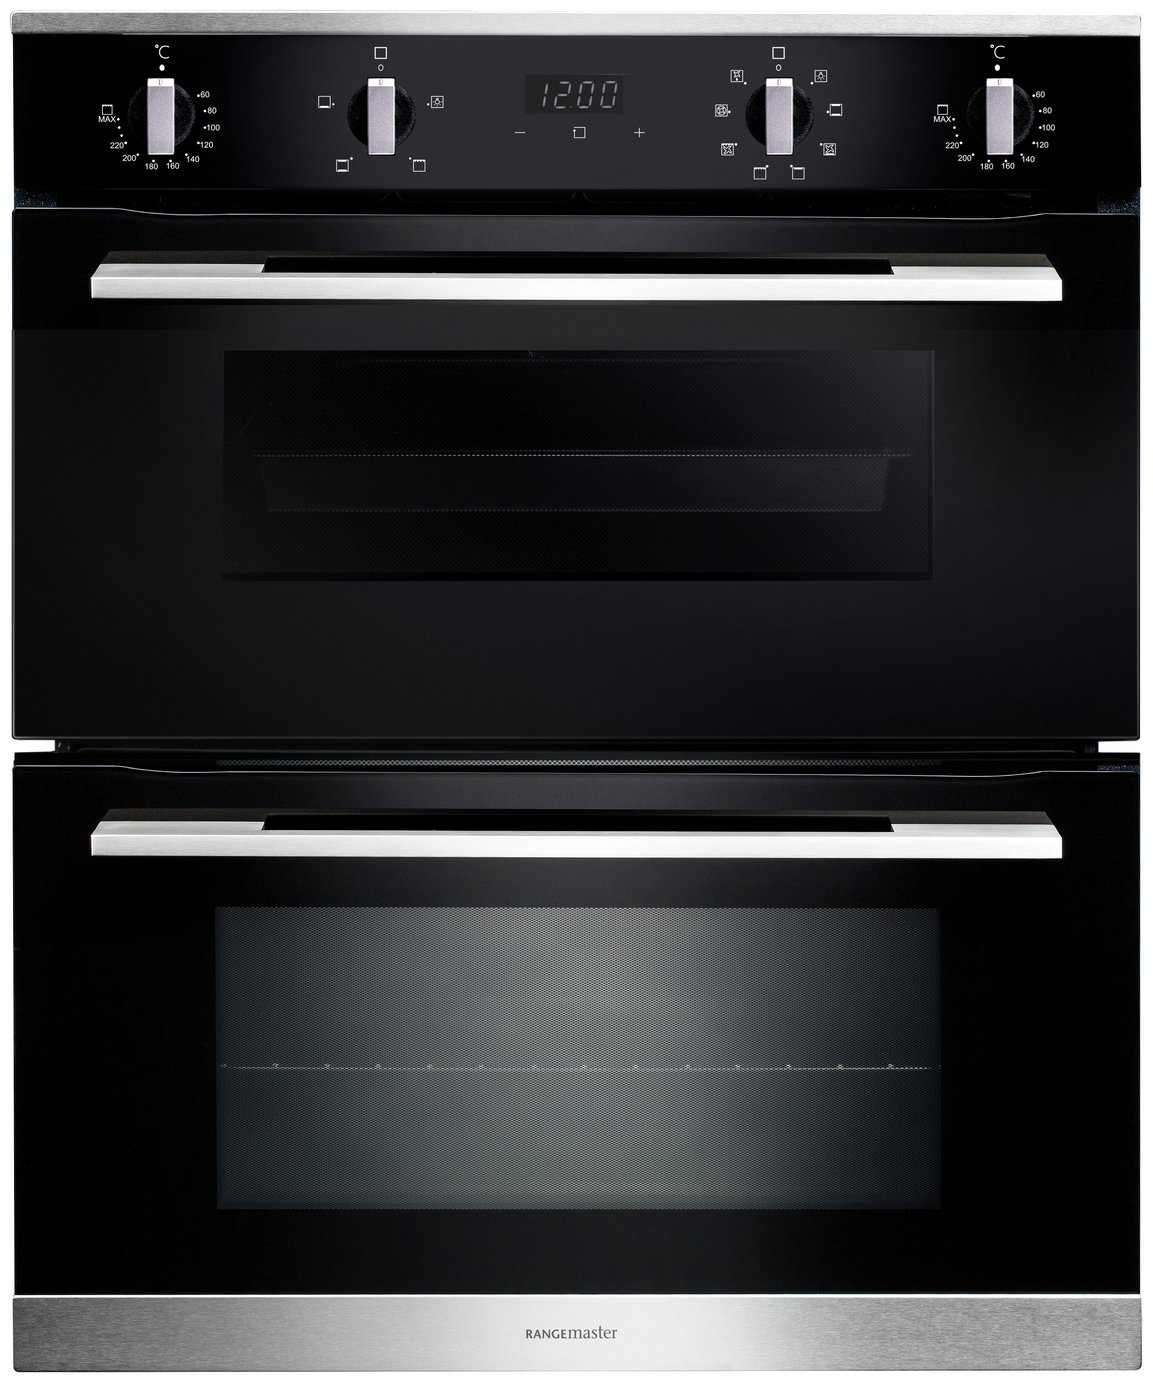 Rangemaster RMB7248BL/SS Built Under Double Electric Oven Reviews